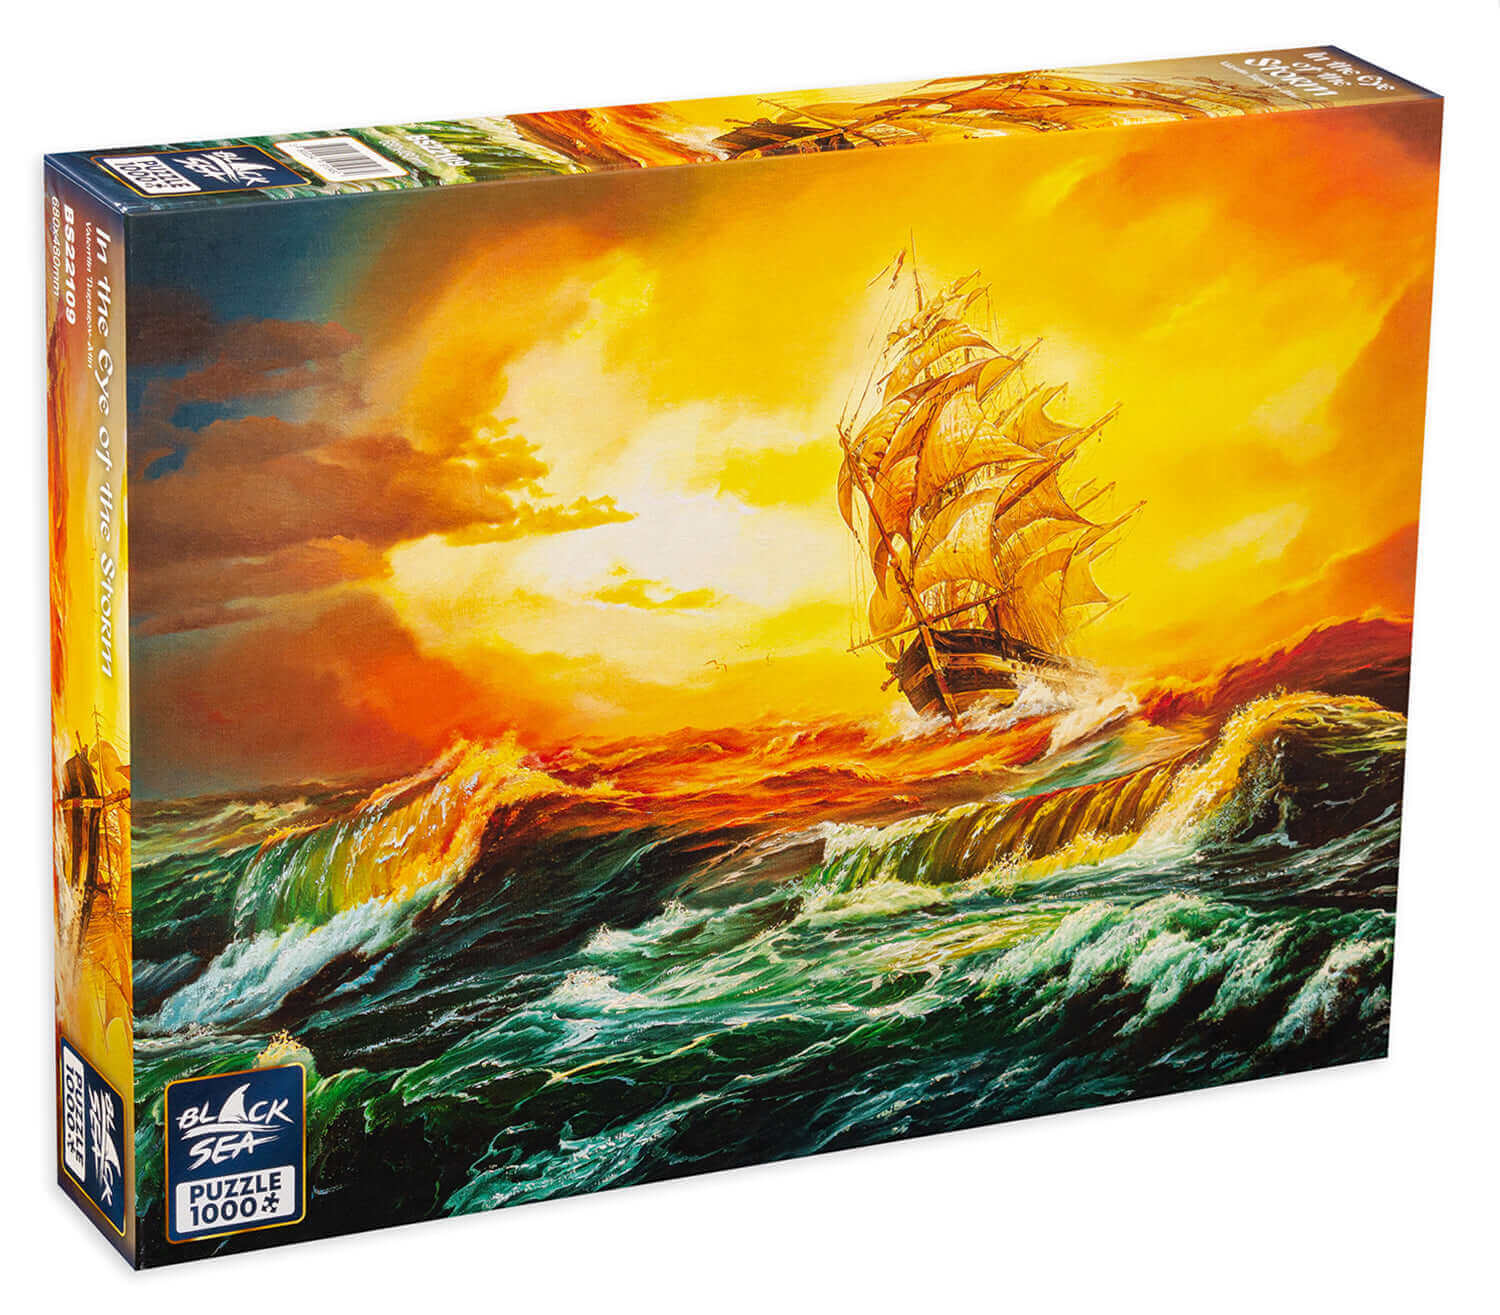 Puzzle Black Sea 1000 pieces - In the Storm, The striking contrast between the force of the sea and the fragility of the man-made object is the basis of this powerfully magnetic painting. The fair wind can turn into a raging storm in mere seconds and a ma